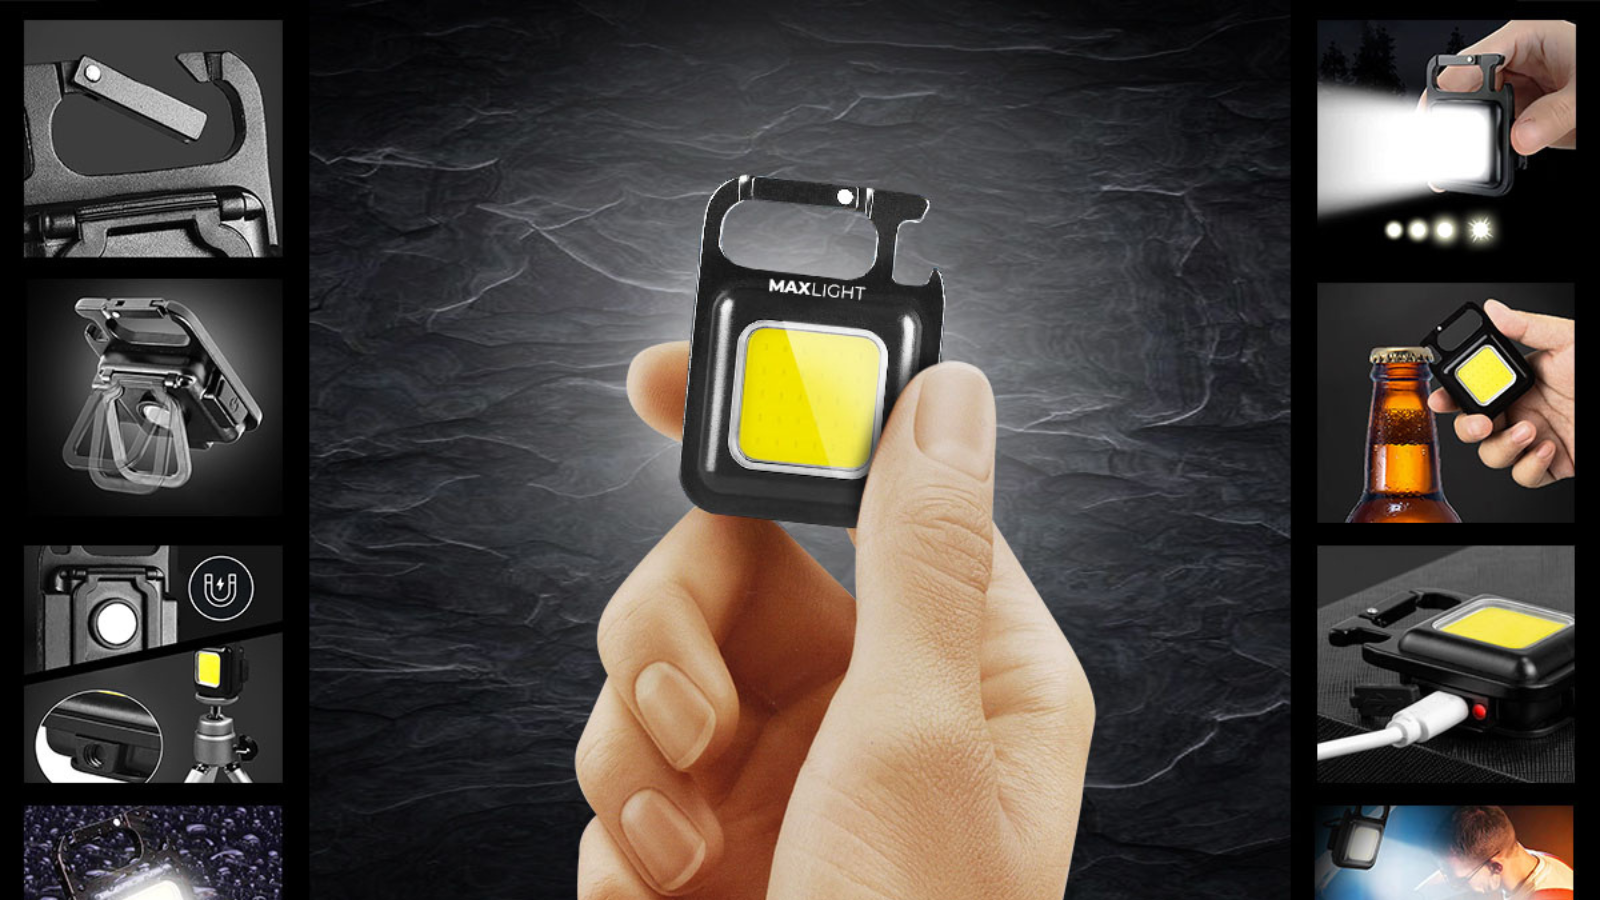 hand holding maxlight utility flashlight with thumbnail images of its other uses